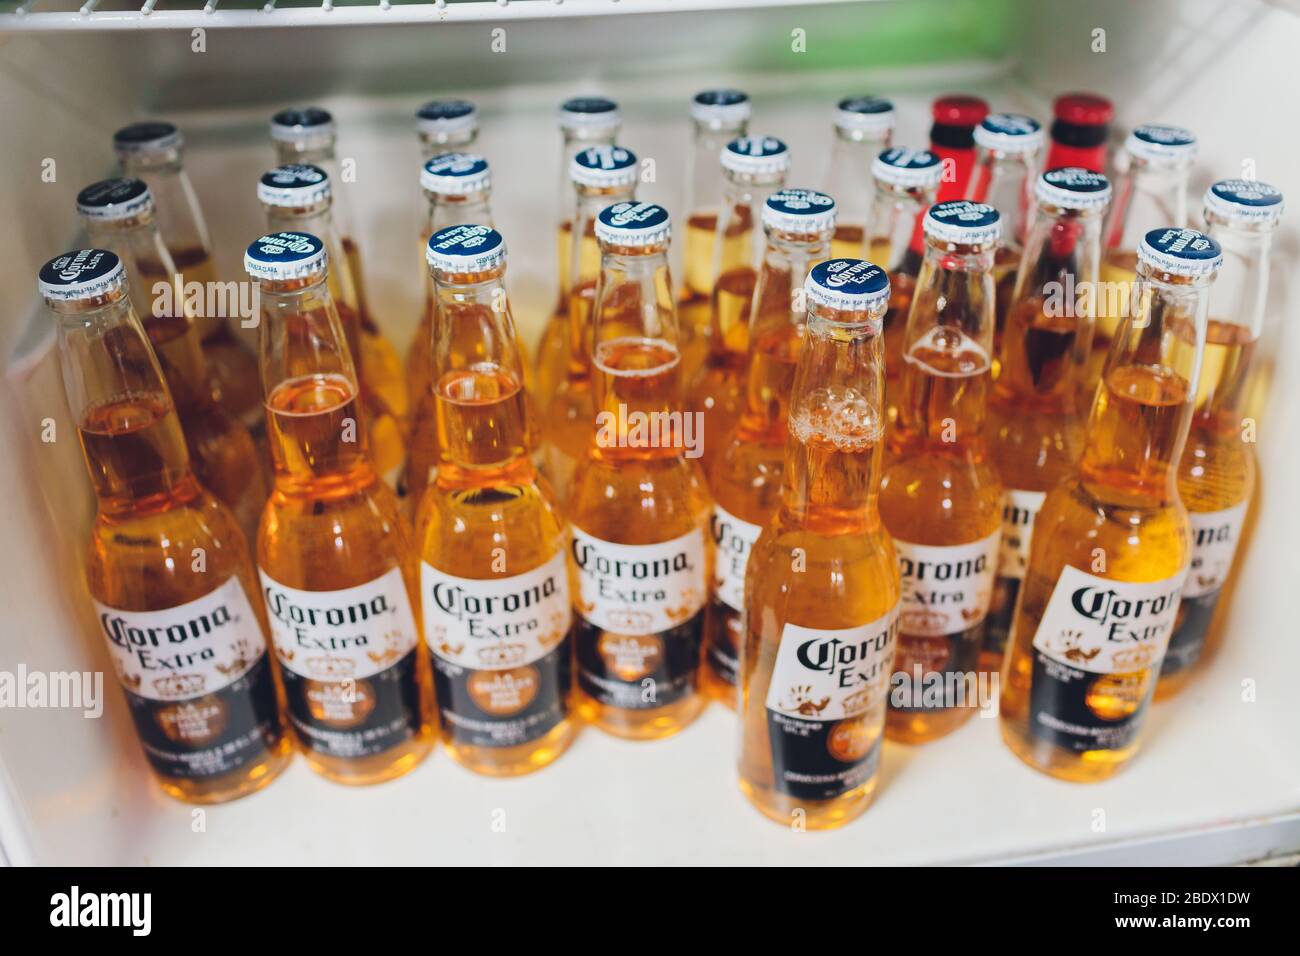 Ufa, Russia - December 19, 2019: Corona extra beer bottles on shelves in a supermarket. Corona Extra is a pale lager produced by Cervecer a Modelo in Stock Photo